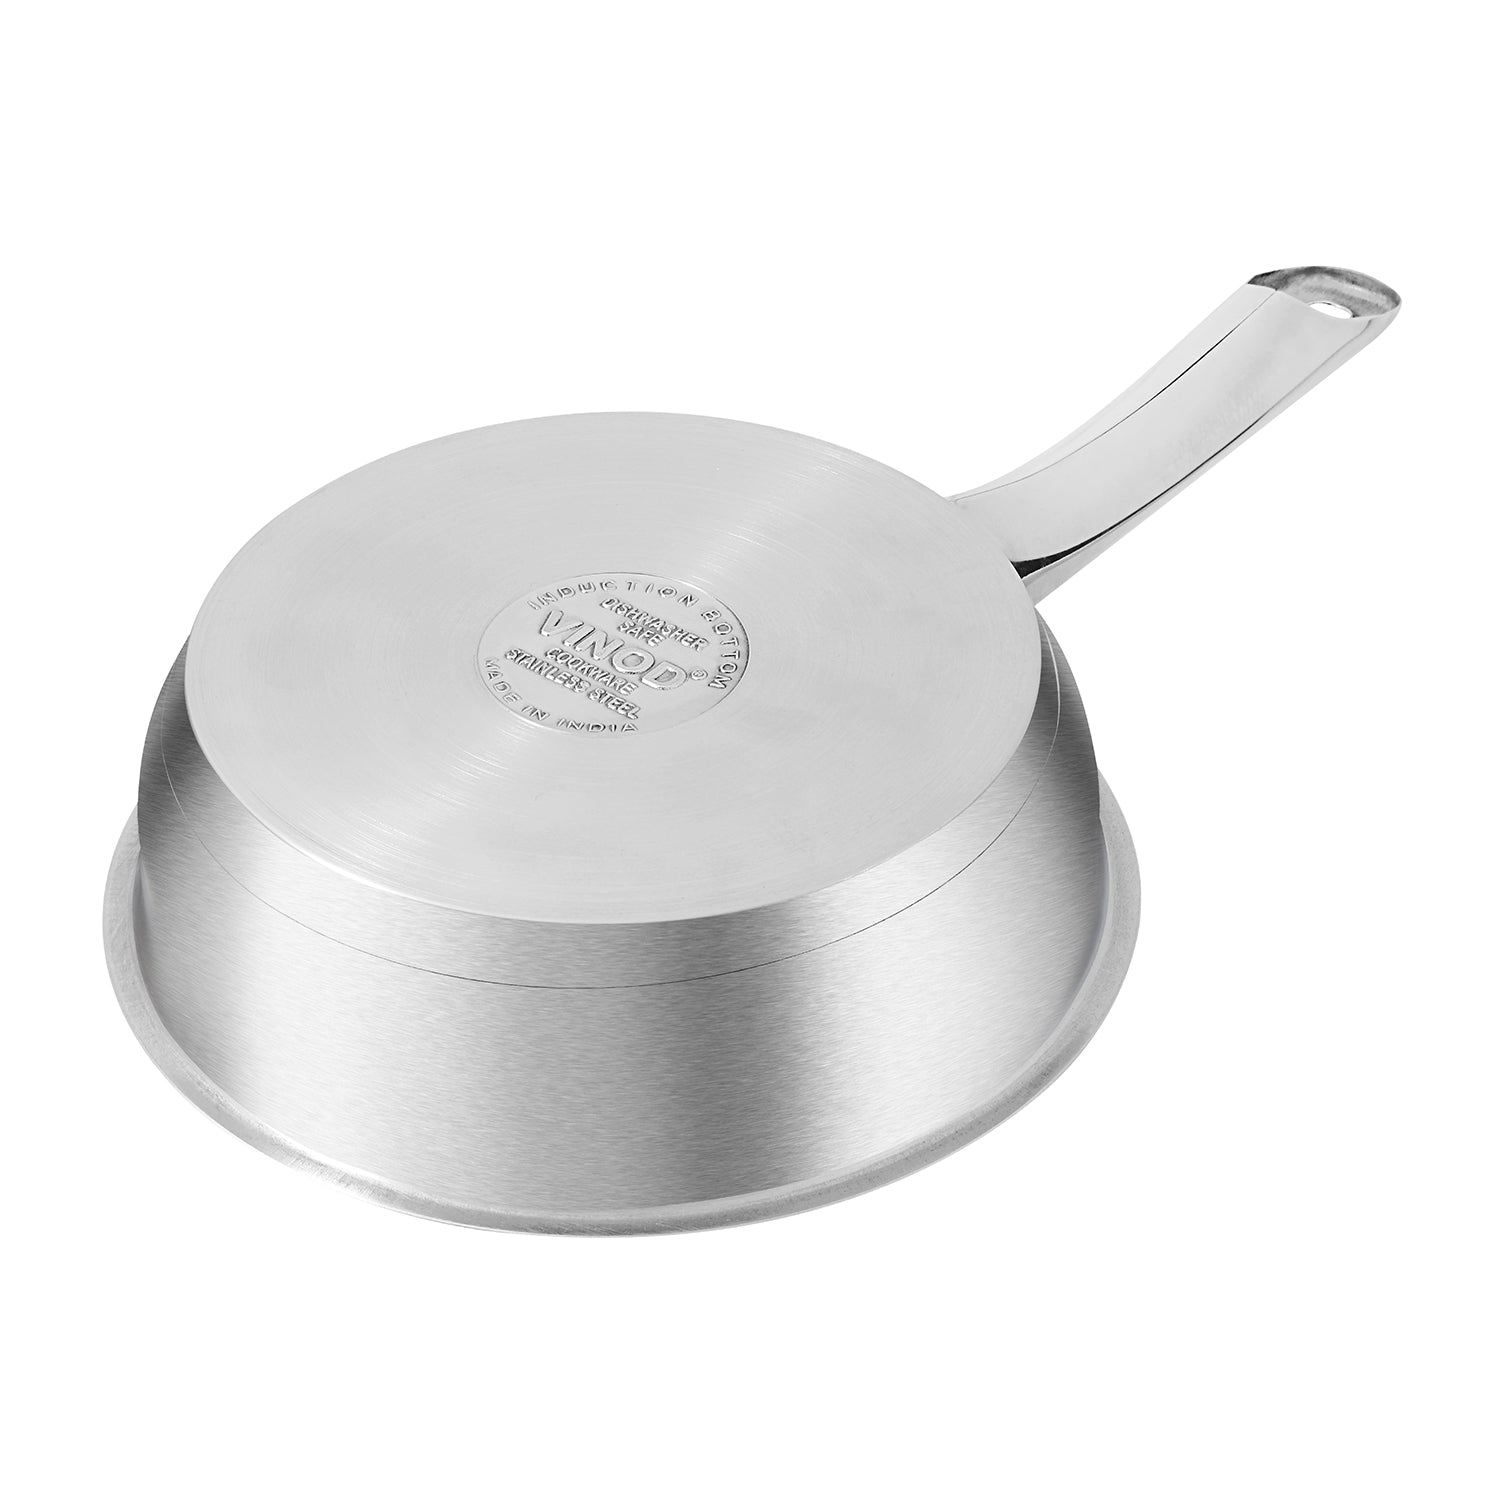 Vinod Stainless Steel Frypan - 18 cm (Induction Friendly)